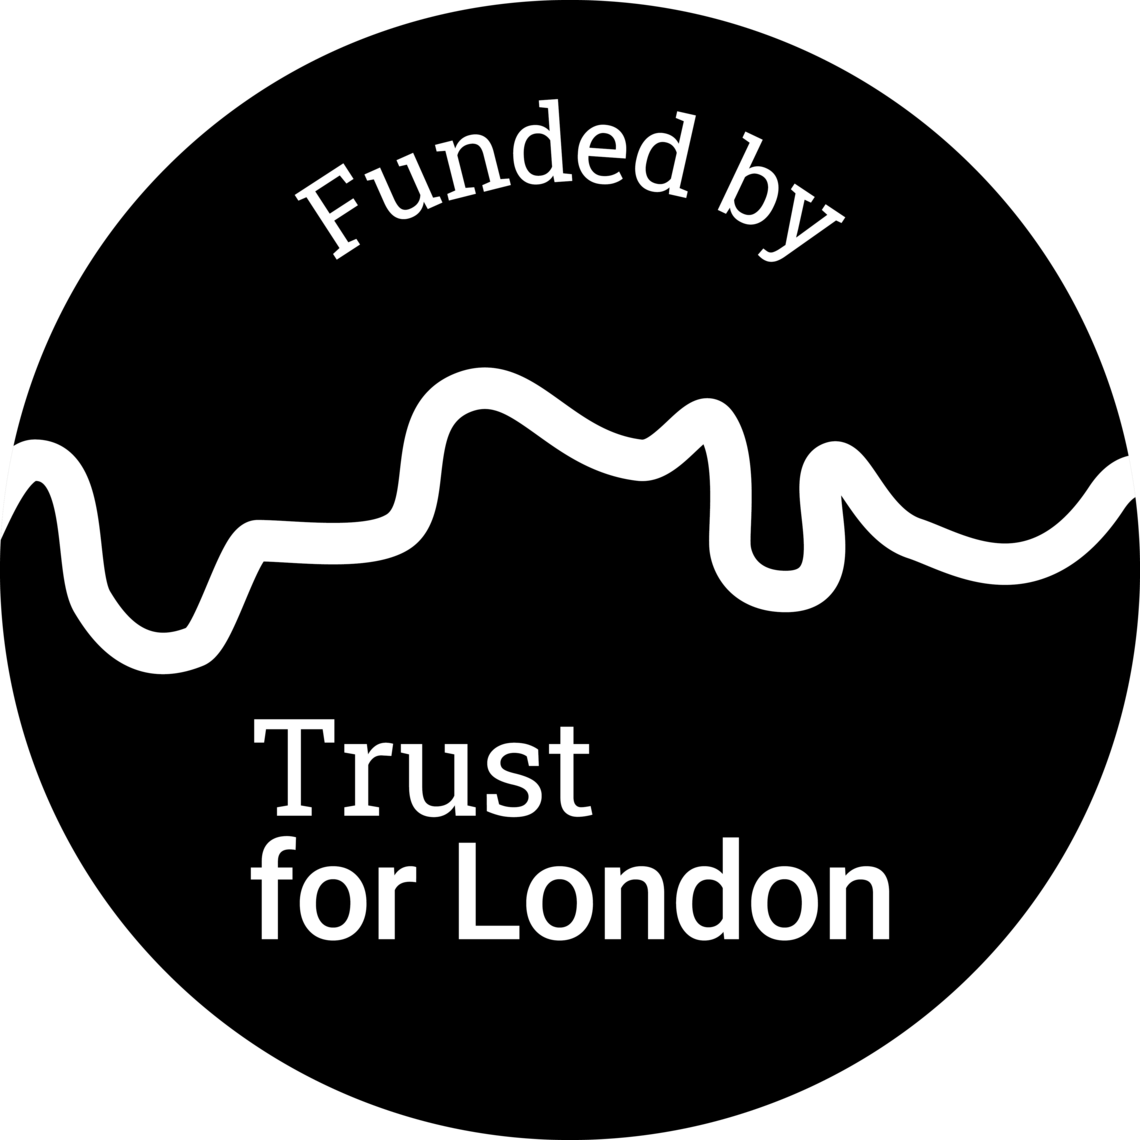 Black circle logo with Funded by Trust for London in white text and a wavy white line representing the river Thames